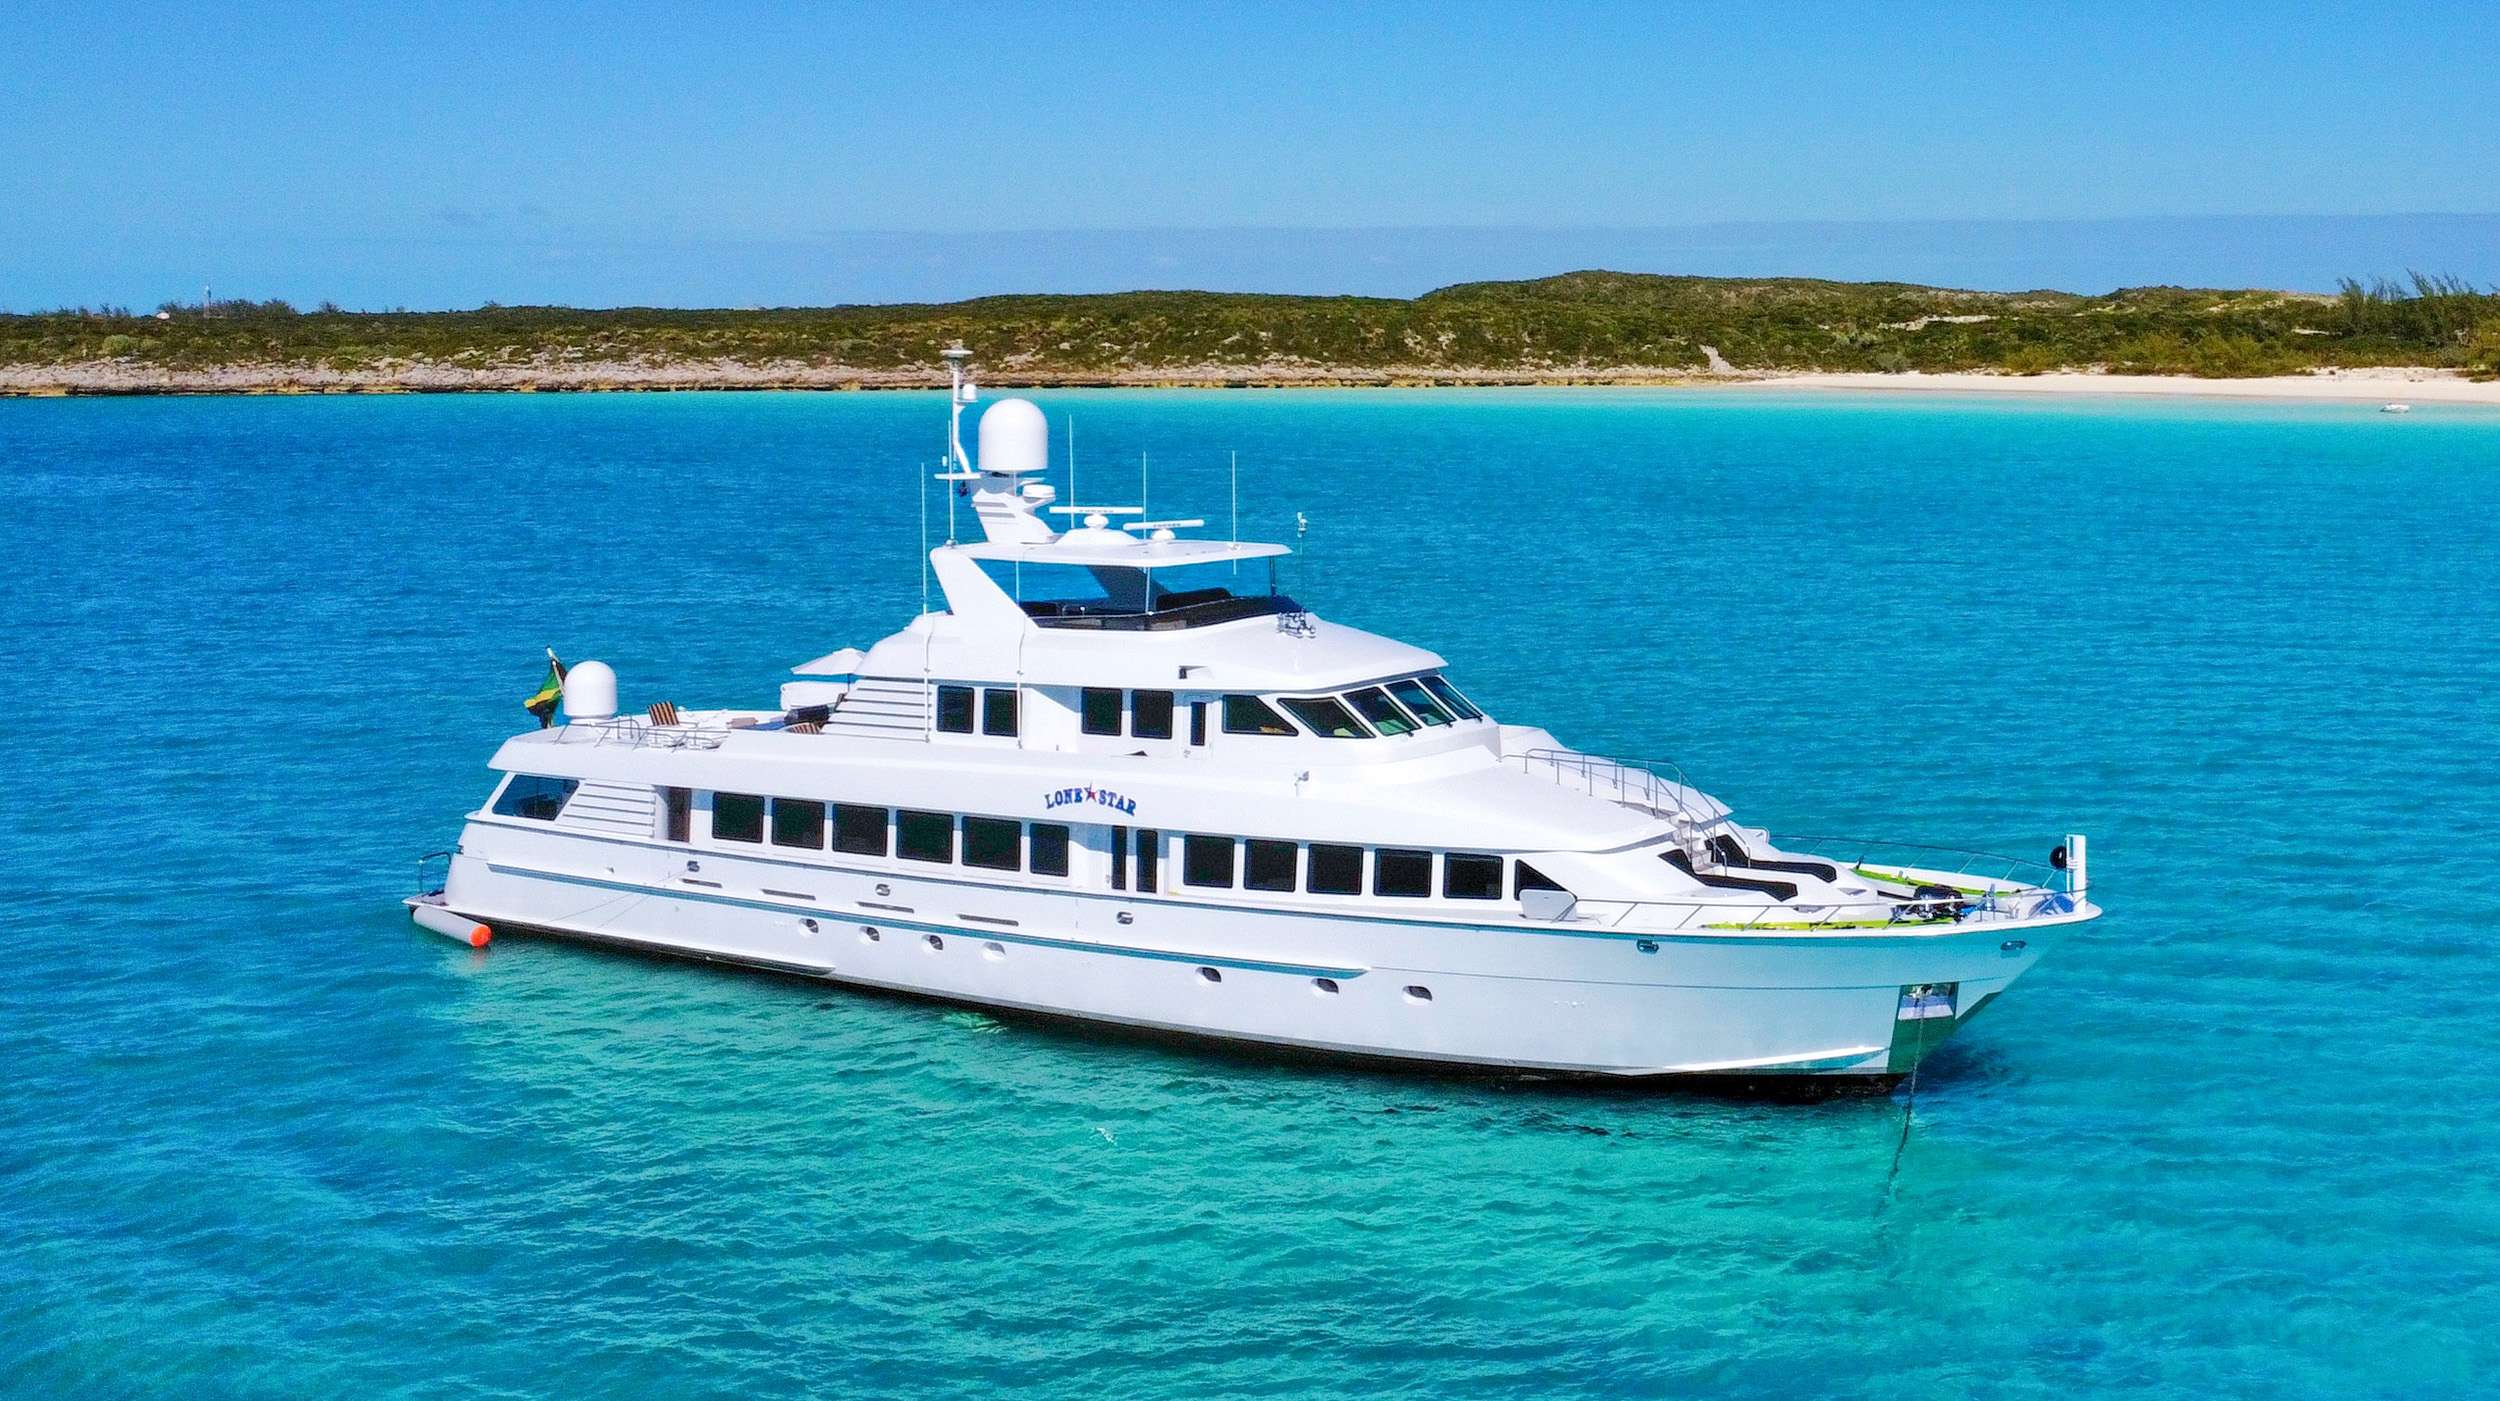 LONE STAR Yacht Charter - Ritzy Charters